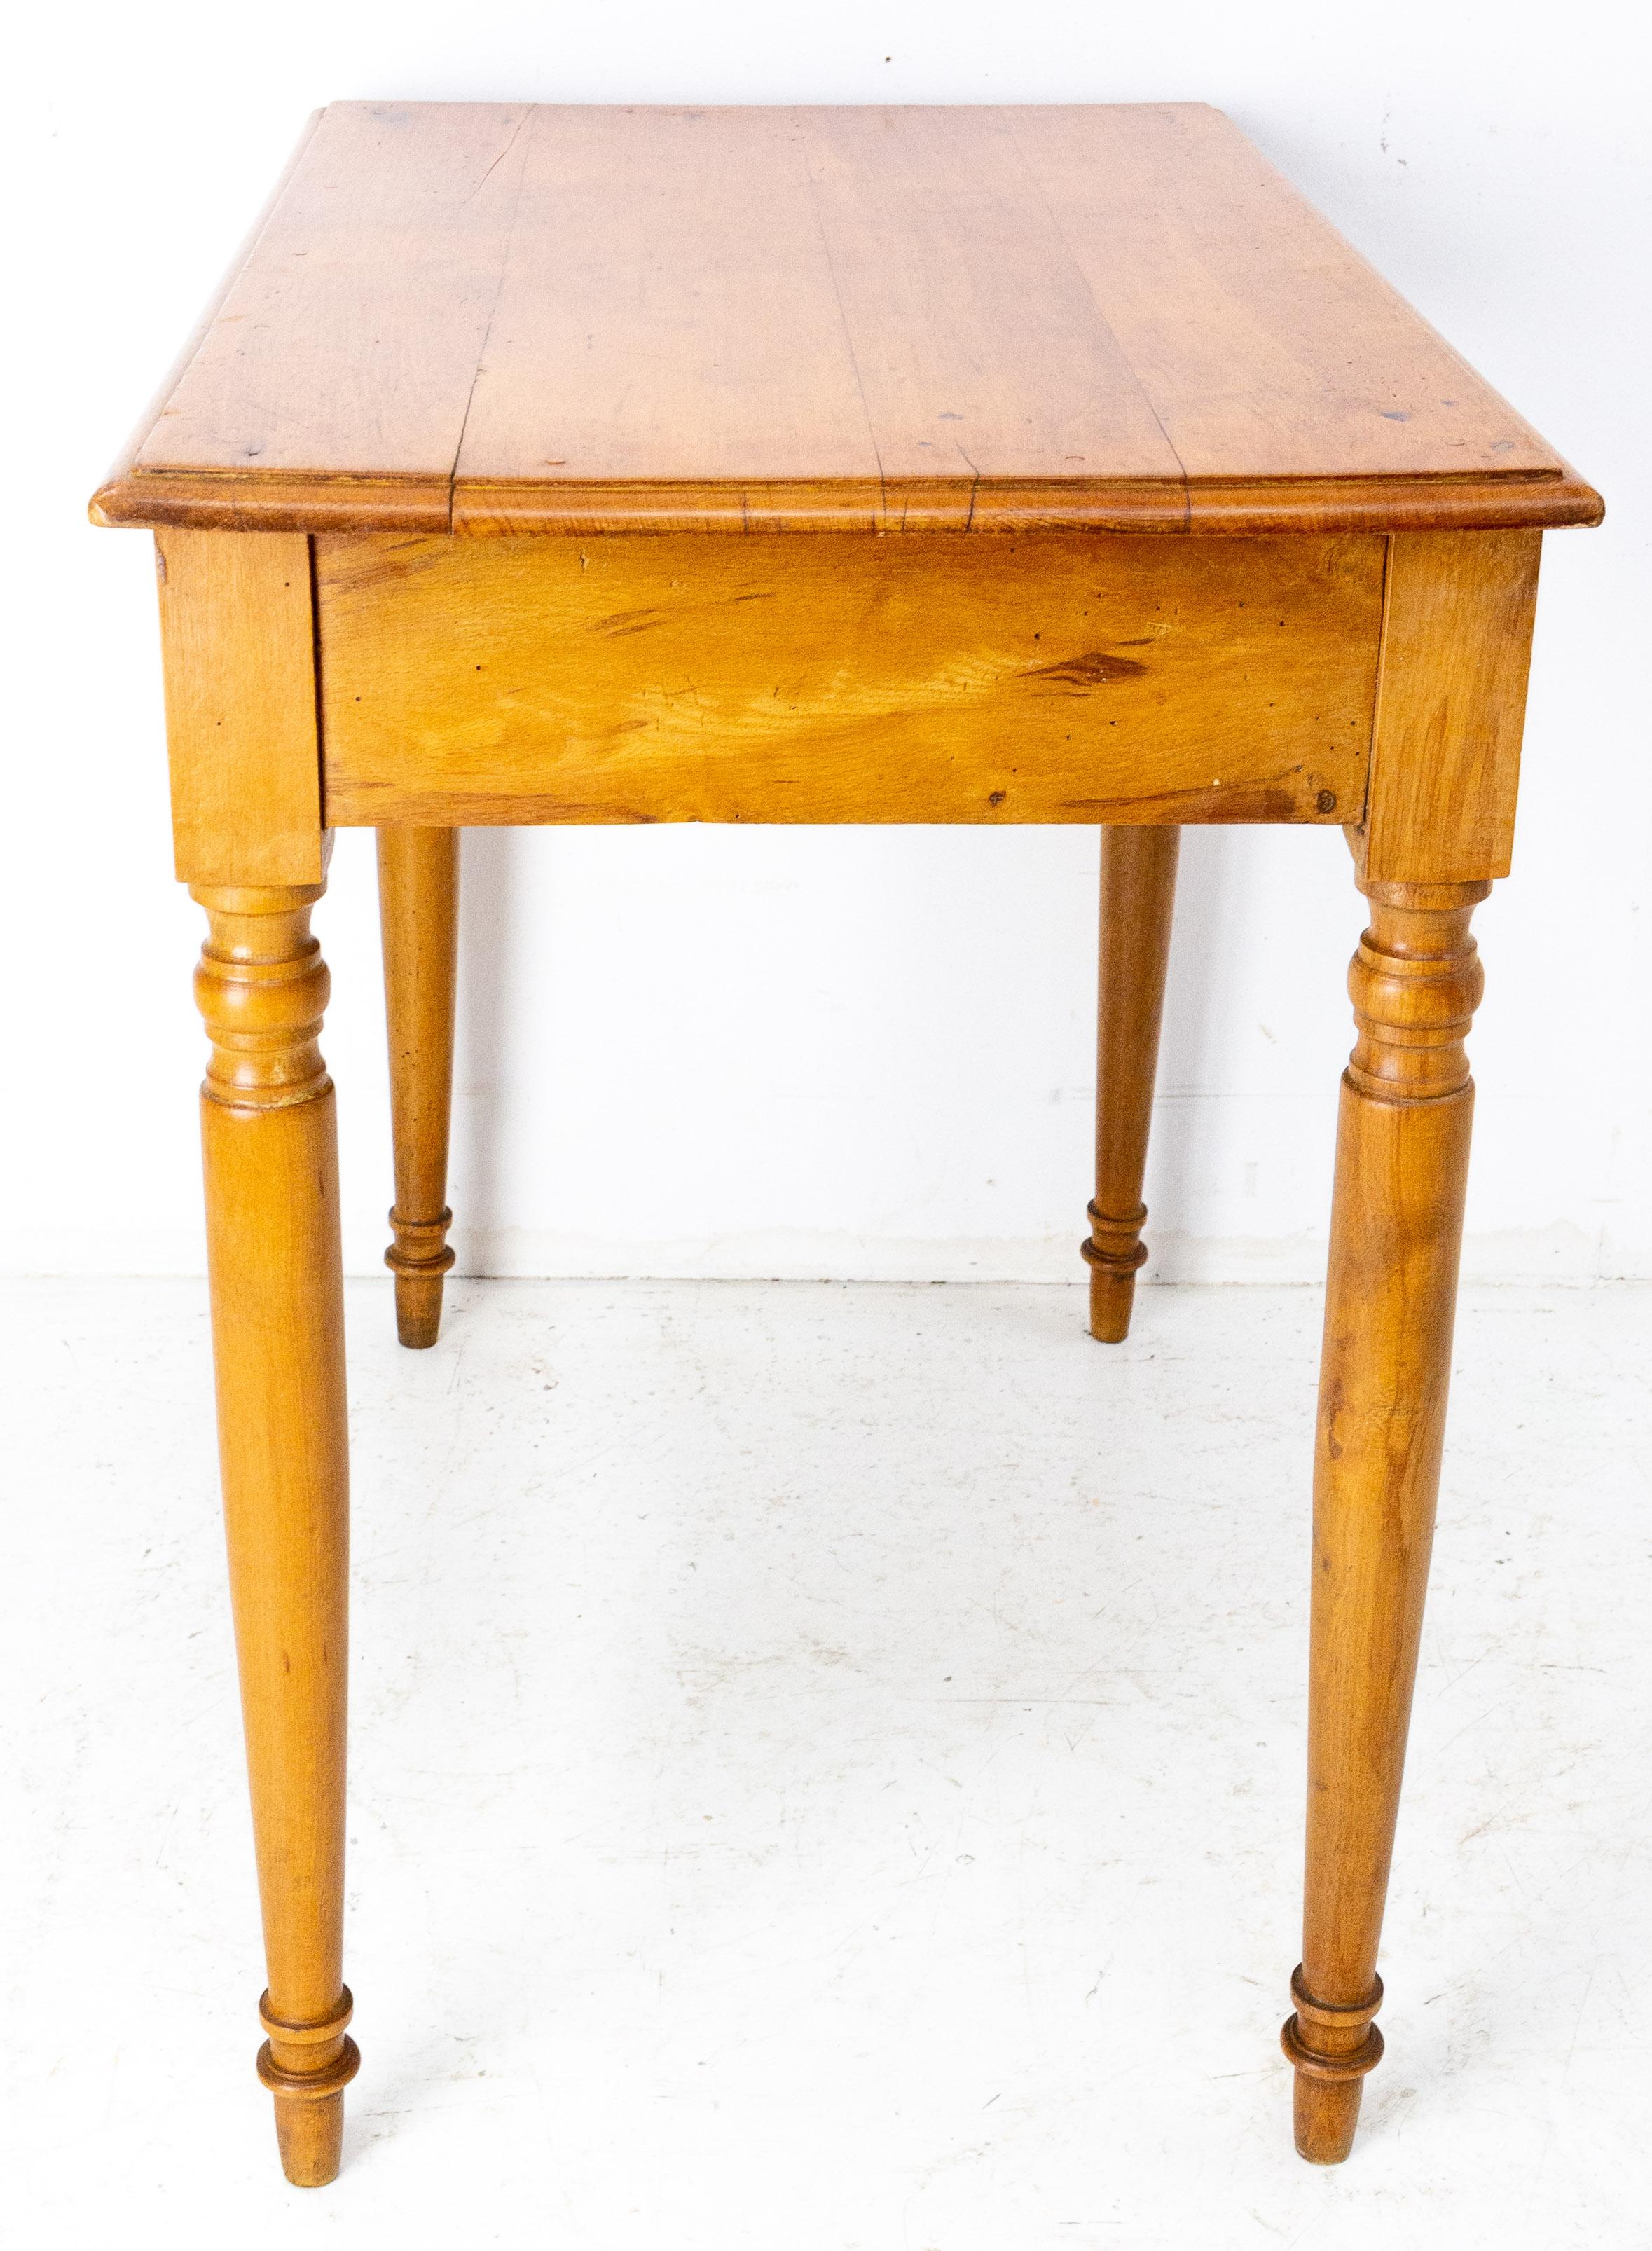 French Art Nouveau Beech Writing Table, Desk or Side Table, circa 1900 For Sale 4